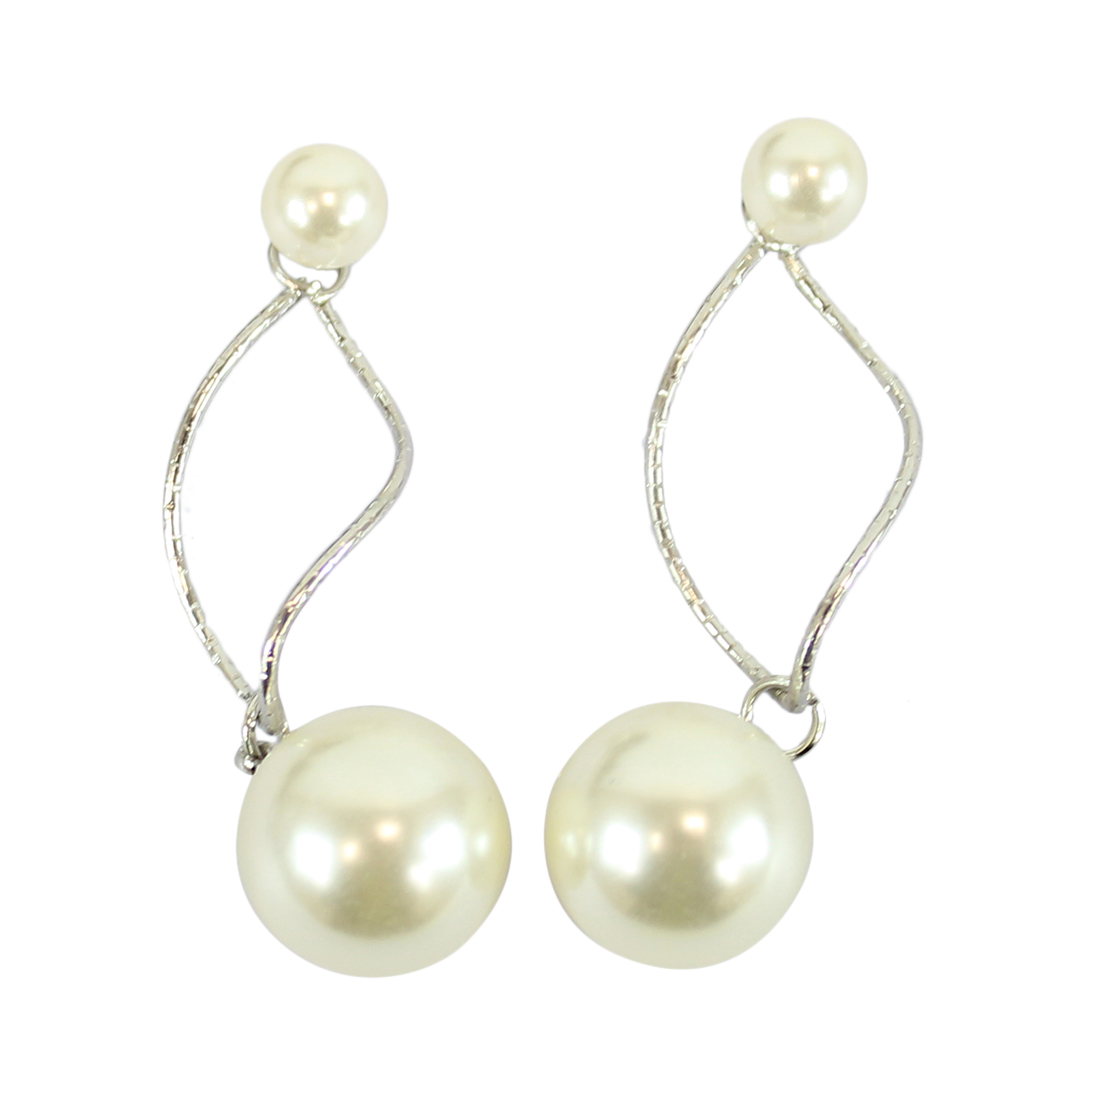 Dangle earrings with big and small white pearls